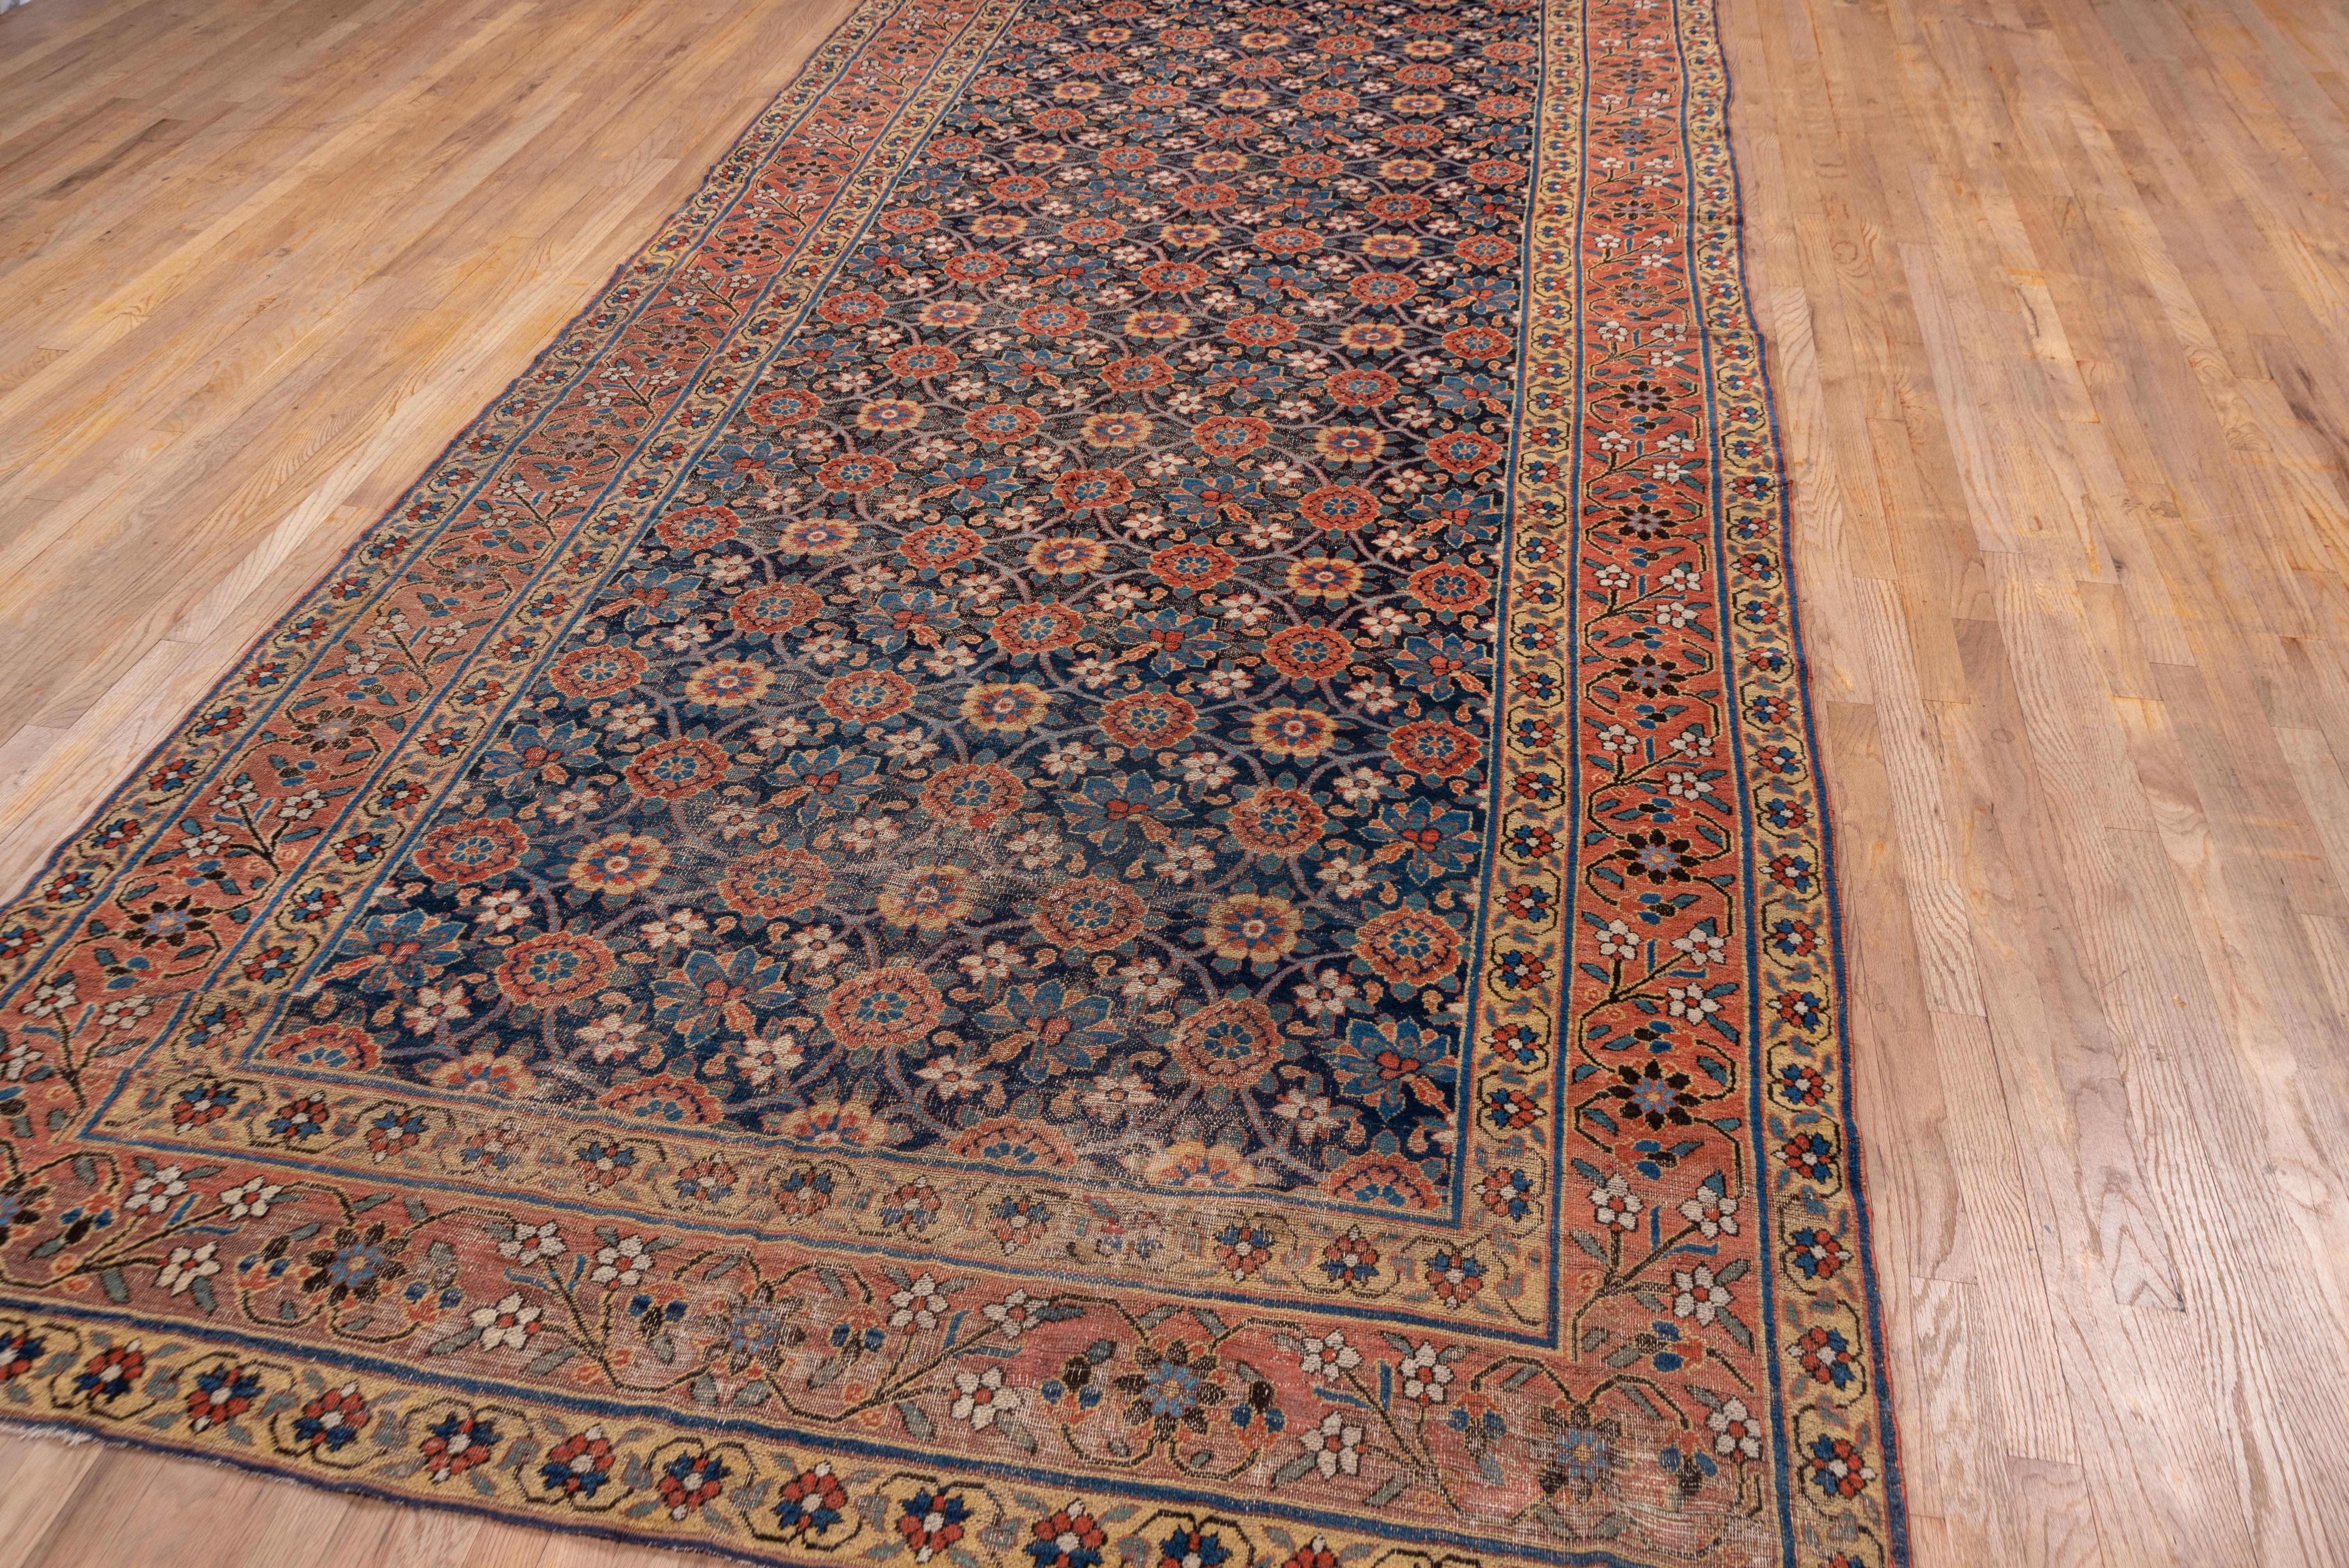 This clearly antique northeast Persian long carpet presents a royal blue ground supporting a rounded version of the popular all-over Mina Khani palmette trellis with contrasting off white prunus flowers and oblique stylized irises. The red border